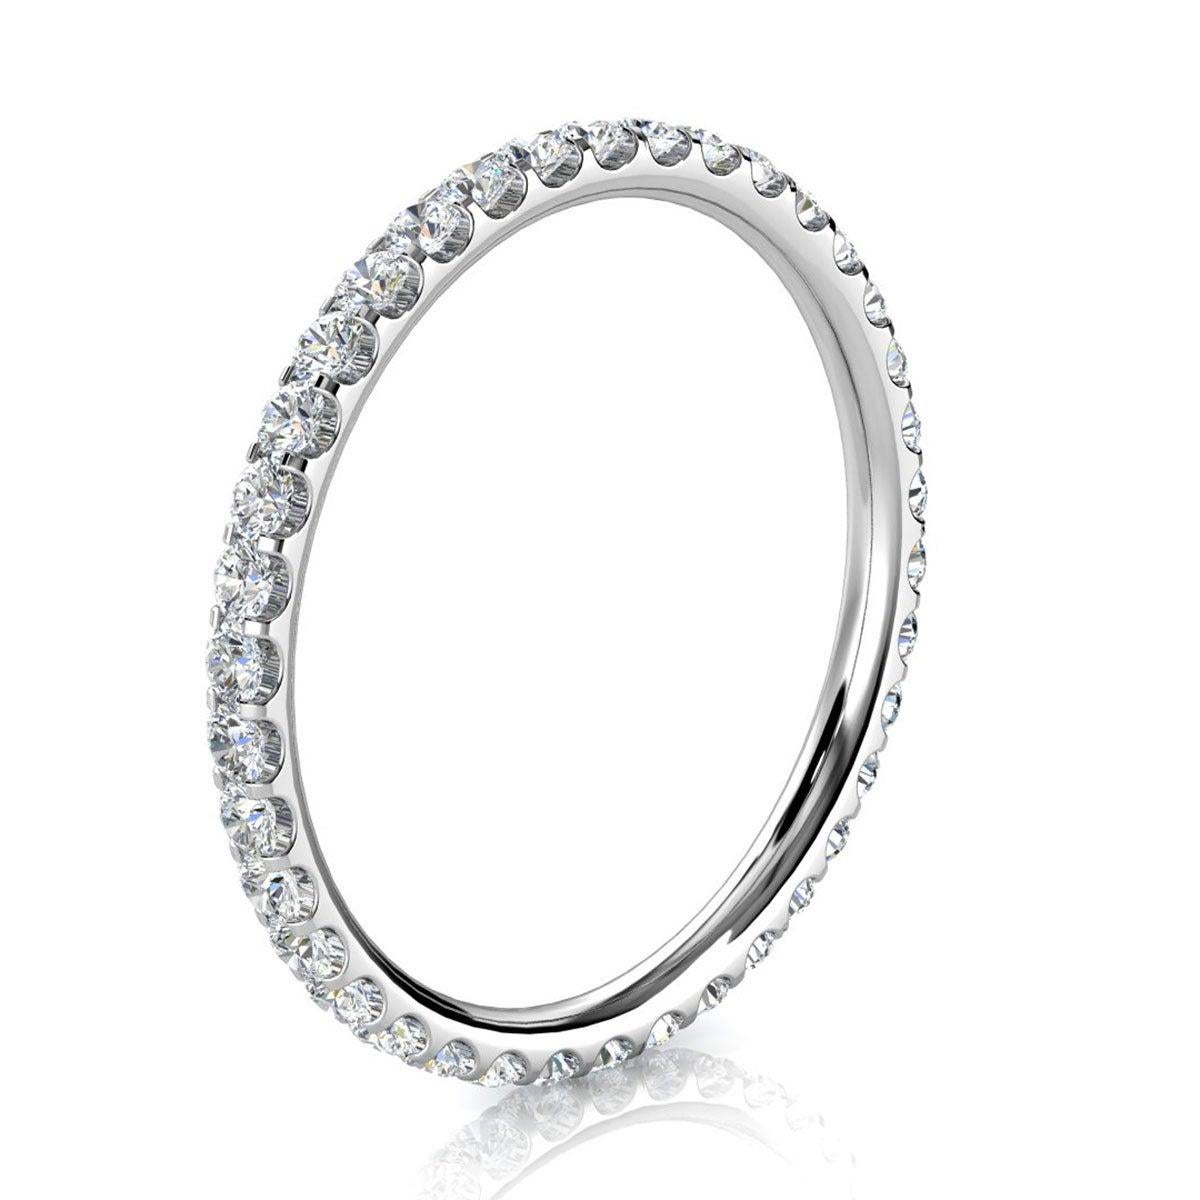 For Sale:  14k White Gold Viola Eternity Micro-Prong Diamond Ring '1/2 Ct. Tw' 2